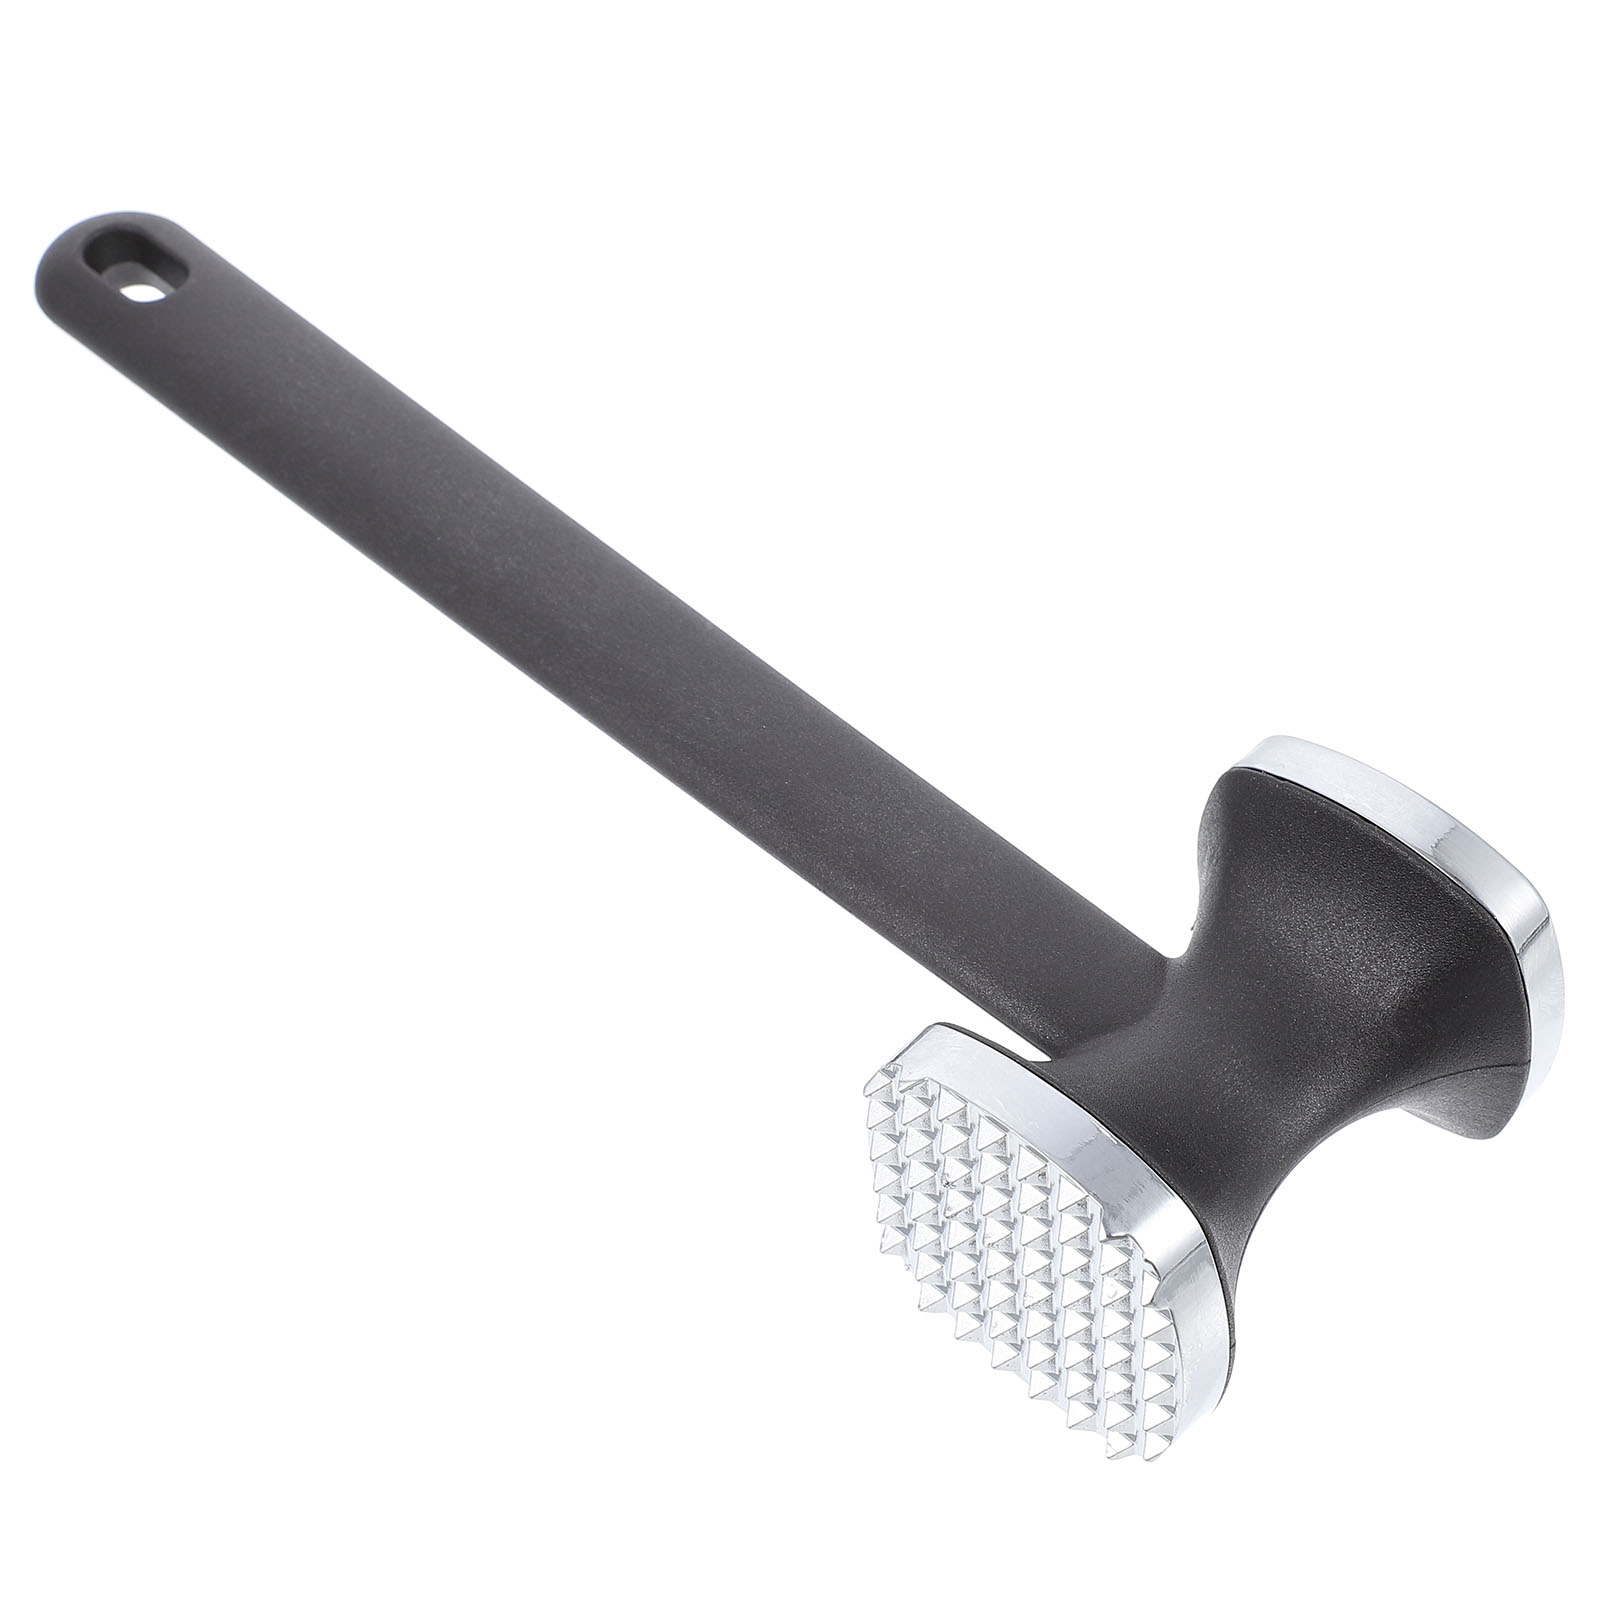 1Pc Meat Tenderizer Dual Sided Hammer Mallet Steak Beef Pounder Kitchen Tool - image 1 of 6